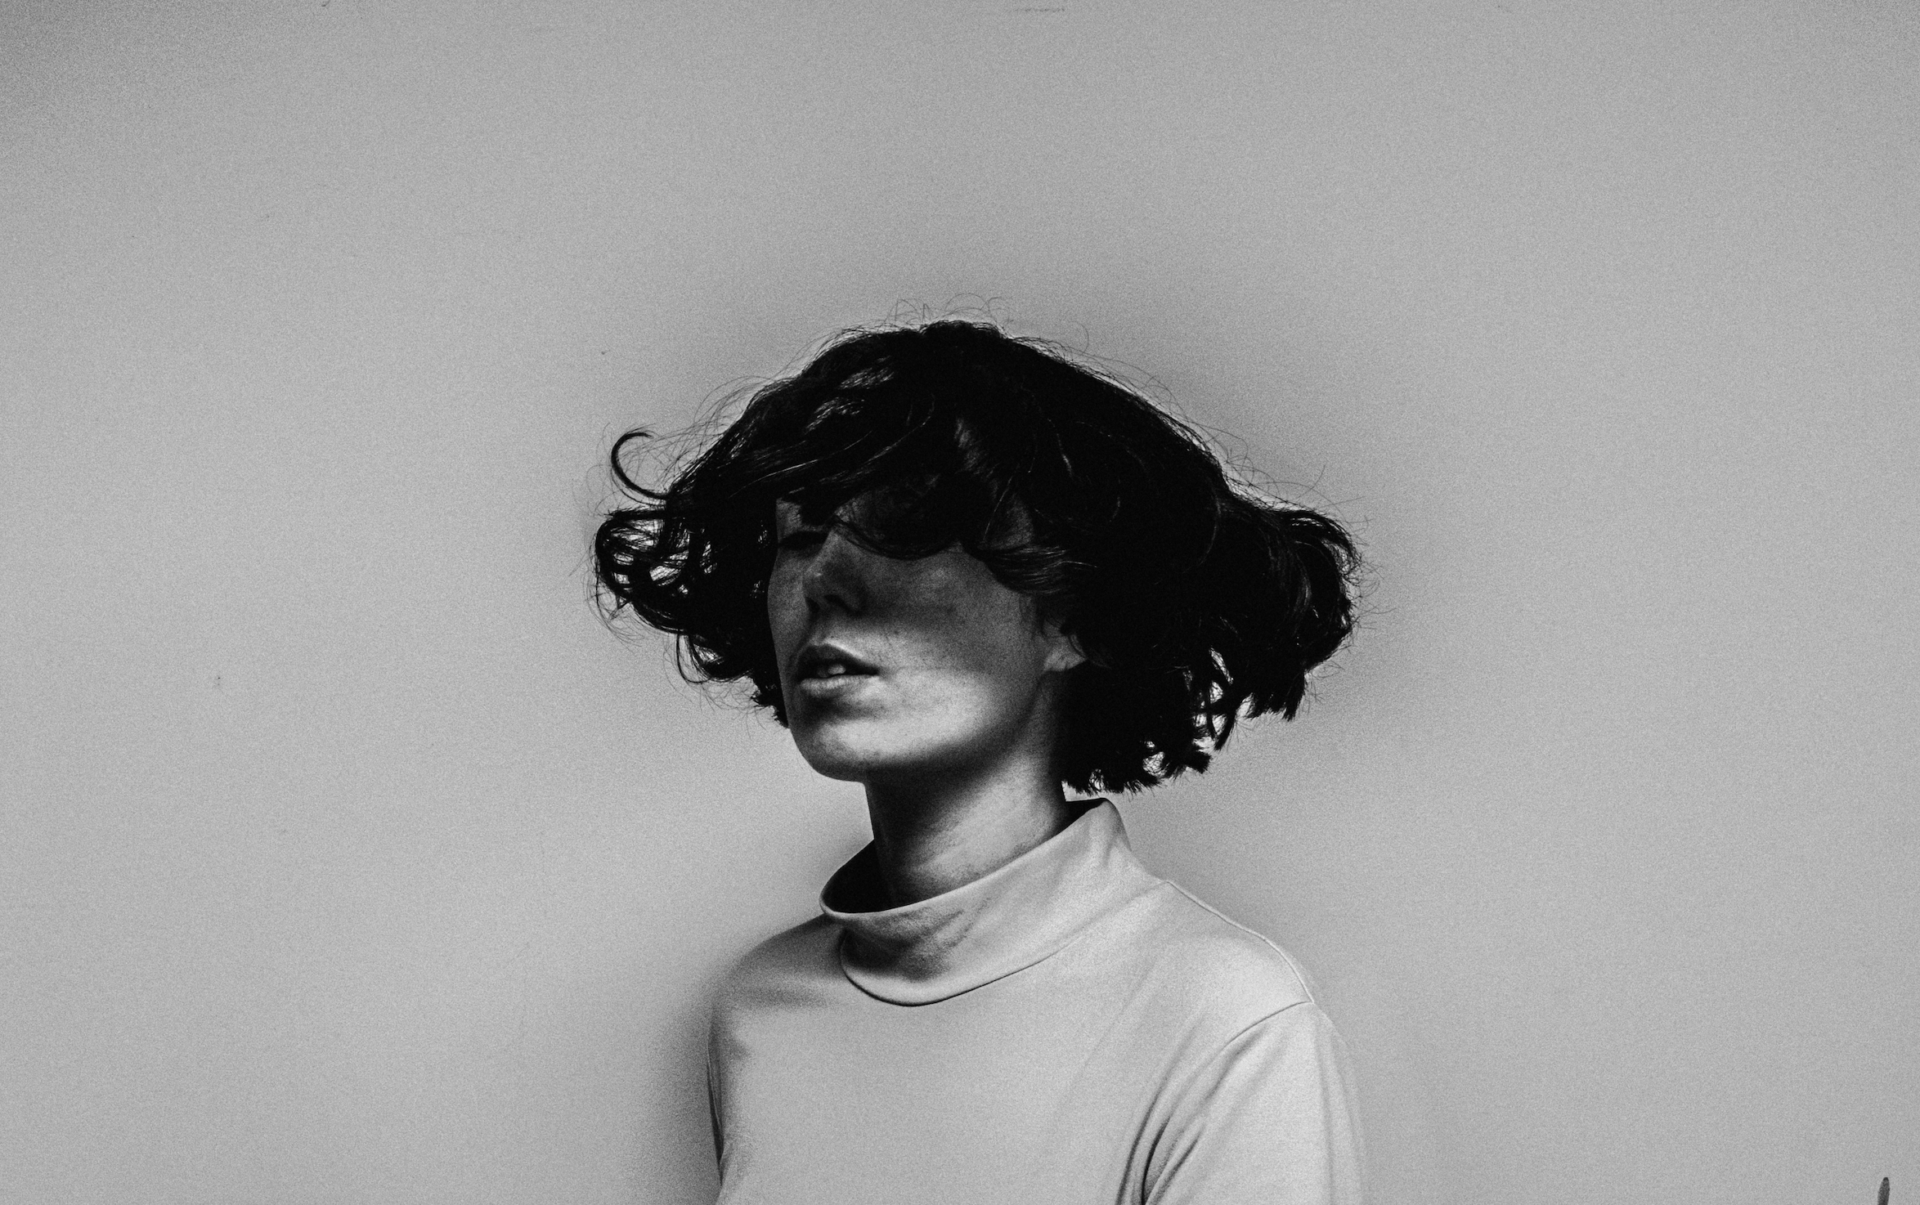 NEWS: Kelly Lee Owens collaborates with John Cale on foreboding bilingual single 'Corner Of My Sky'